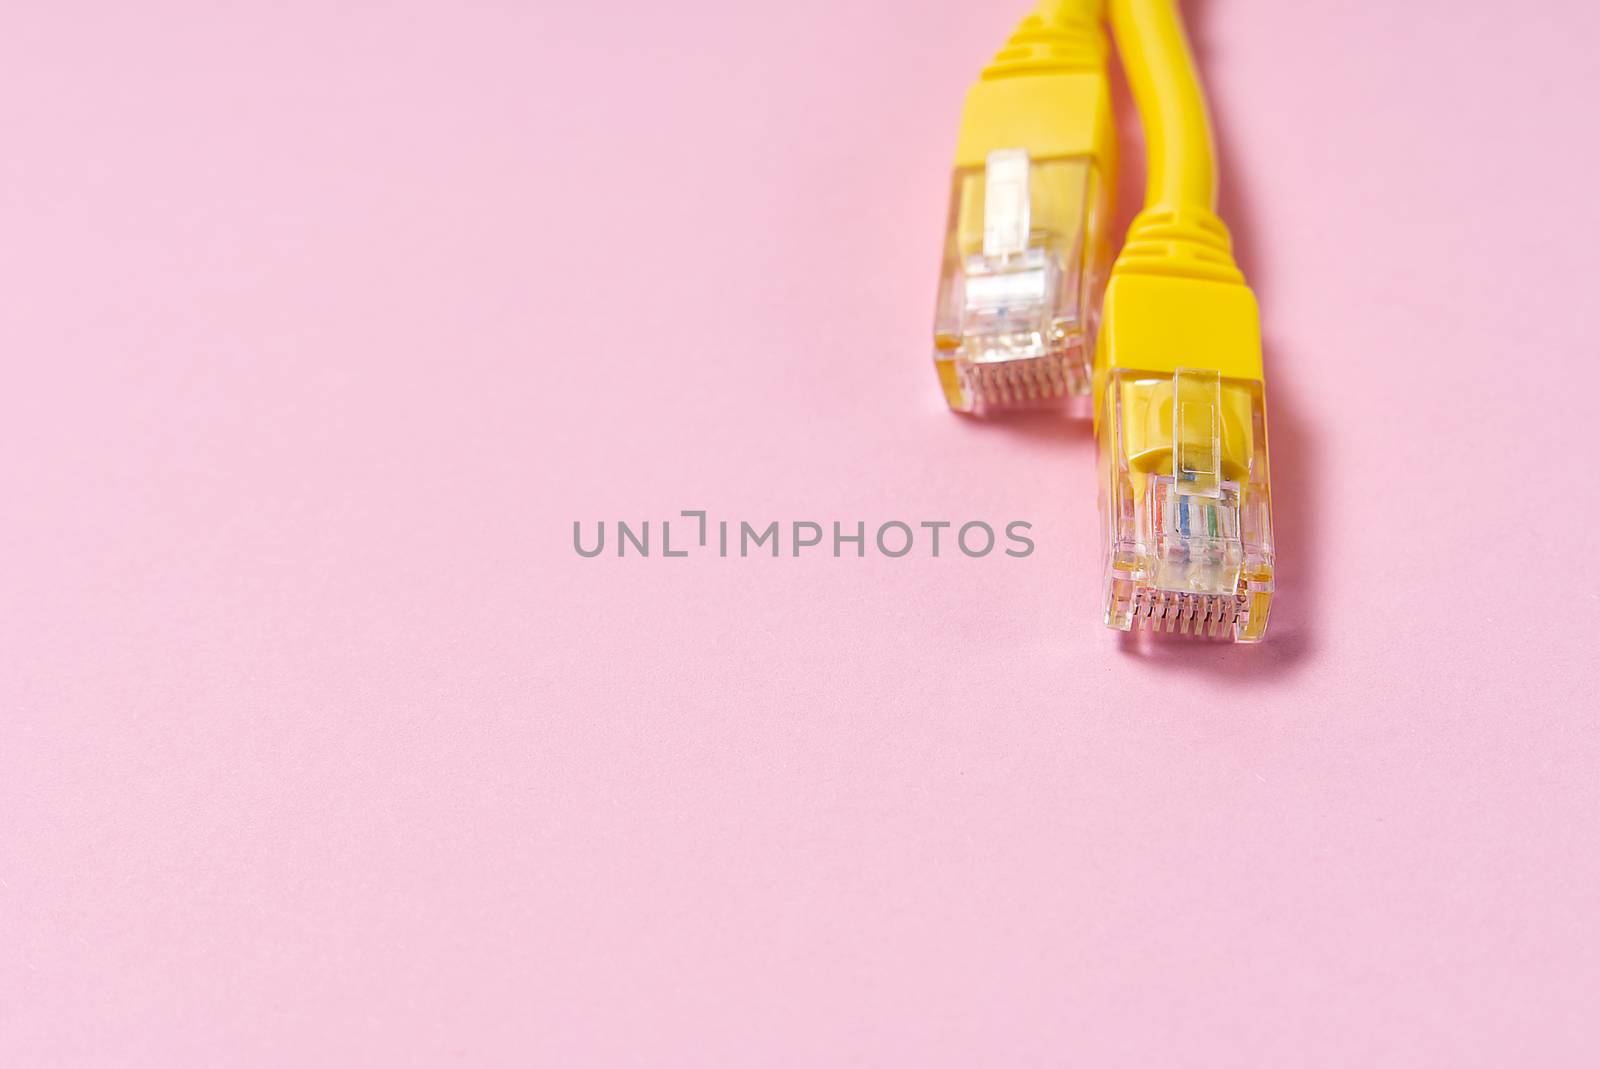 internet wire cat6 cat5. the concept of connecting to an Internet network or providing construction, repair, and high-speed Internet services